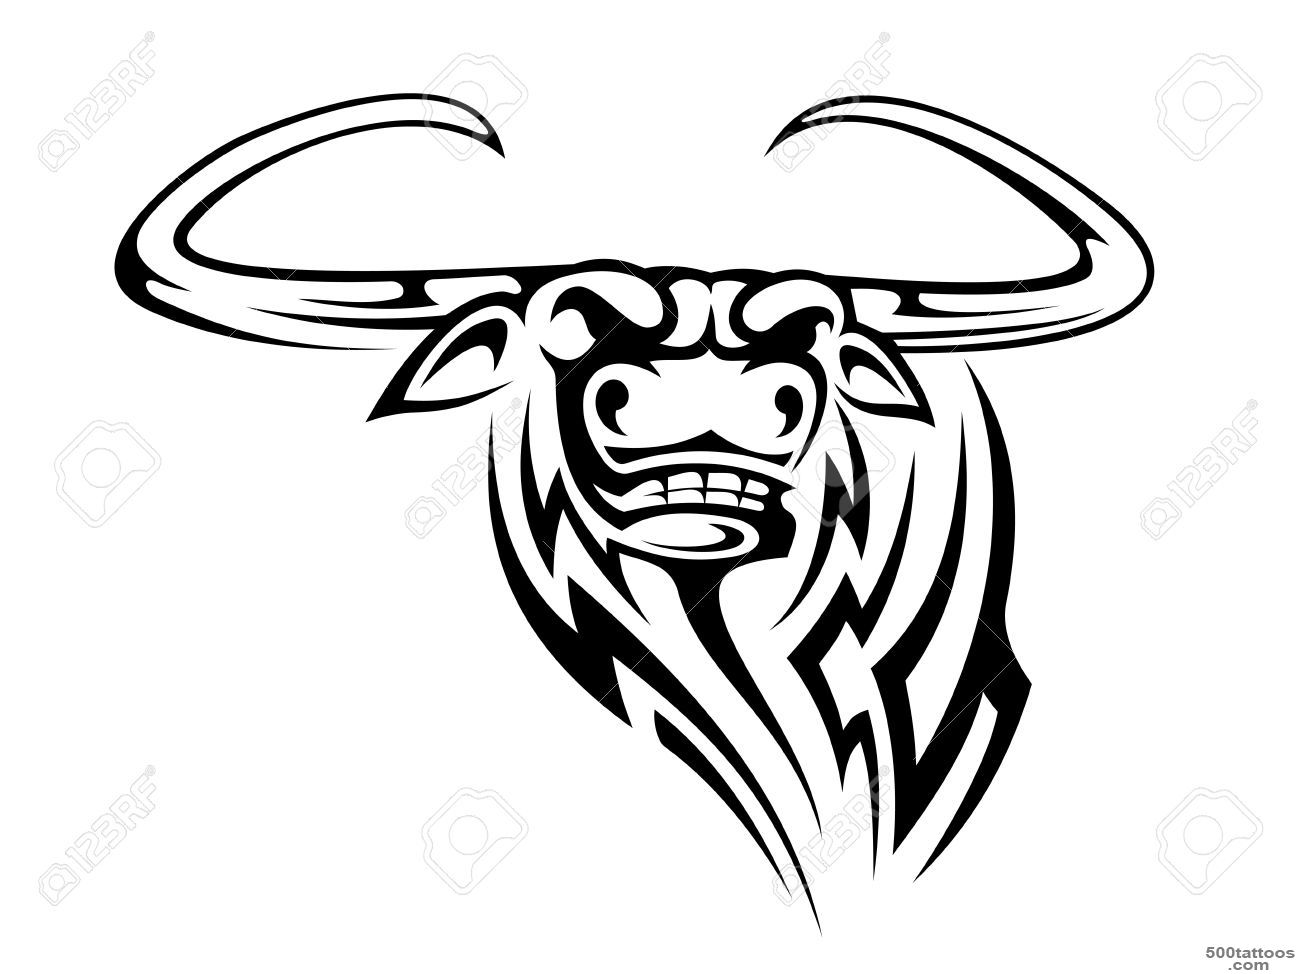 Buffalo Mascot Isolated On White Background For Tattoo Royalty ..._13